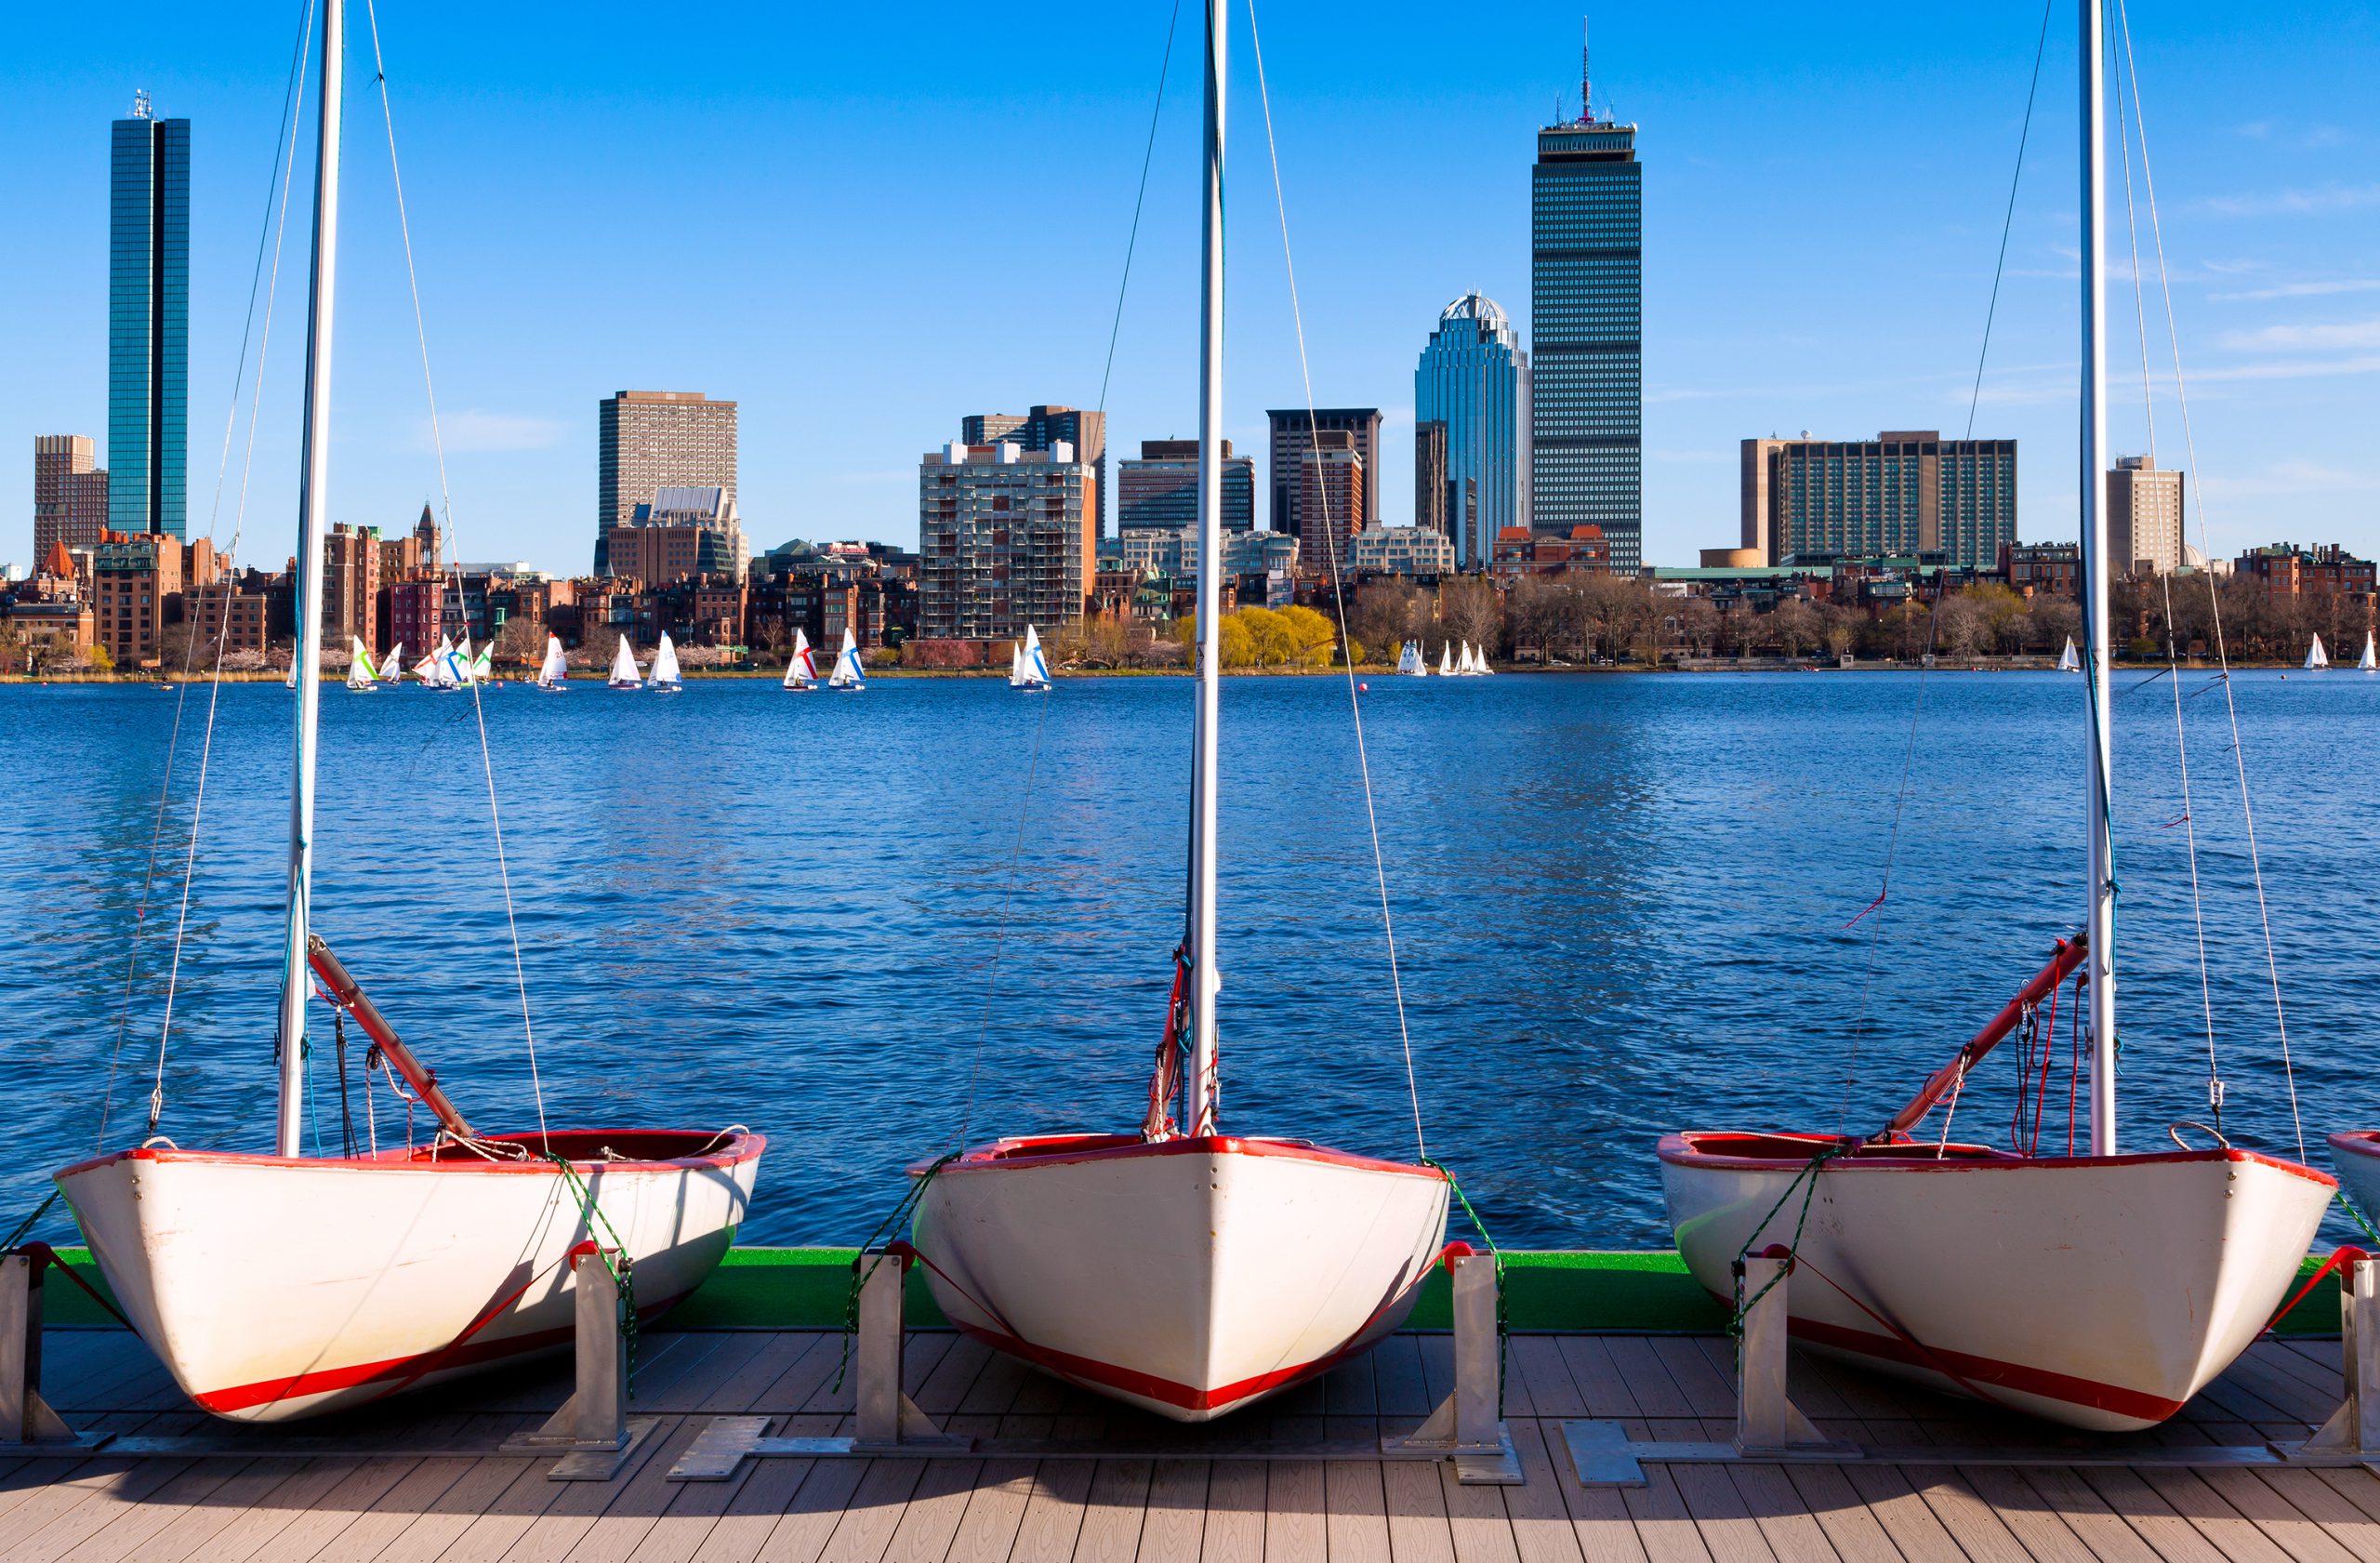 Boats on the Charles River in Boston